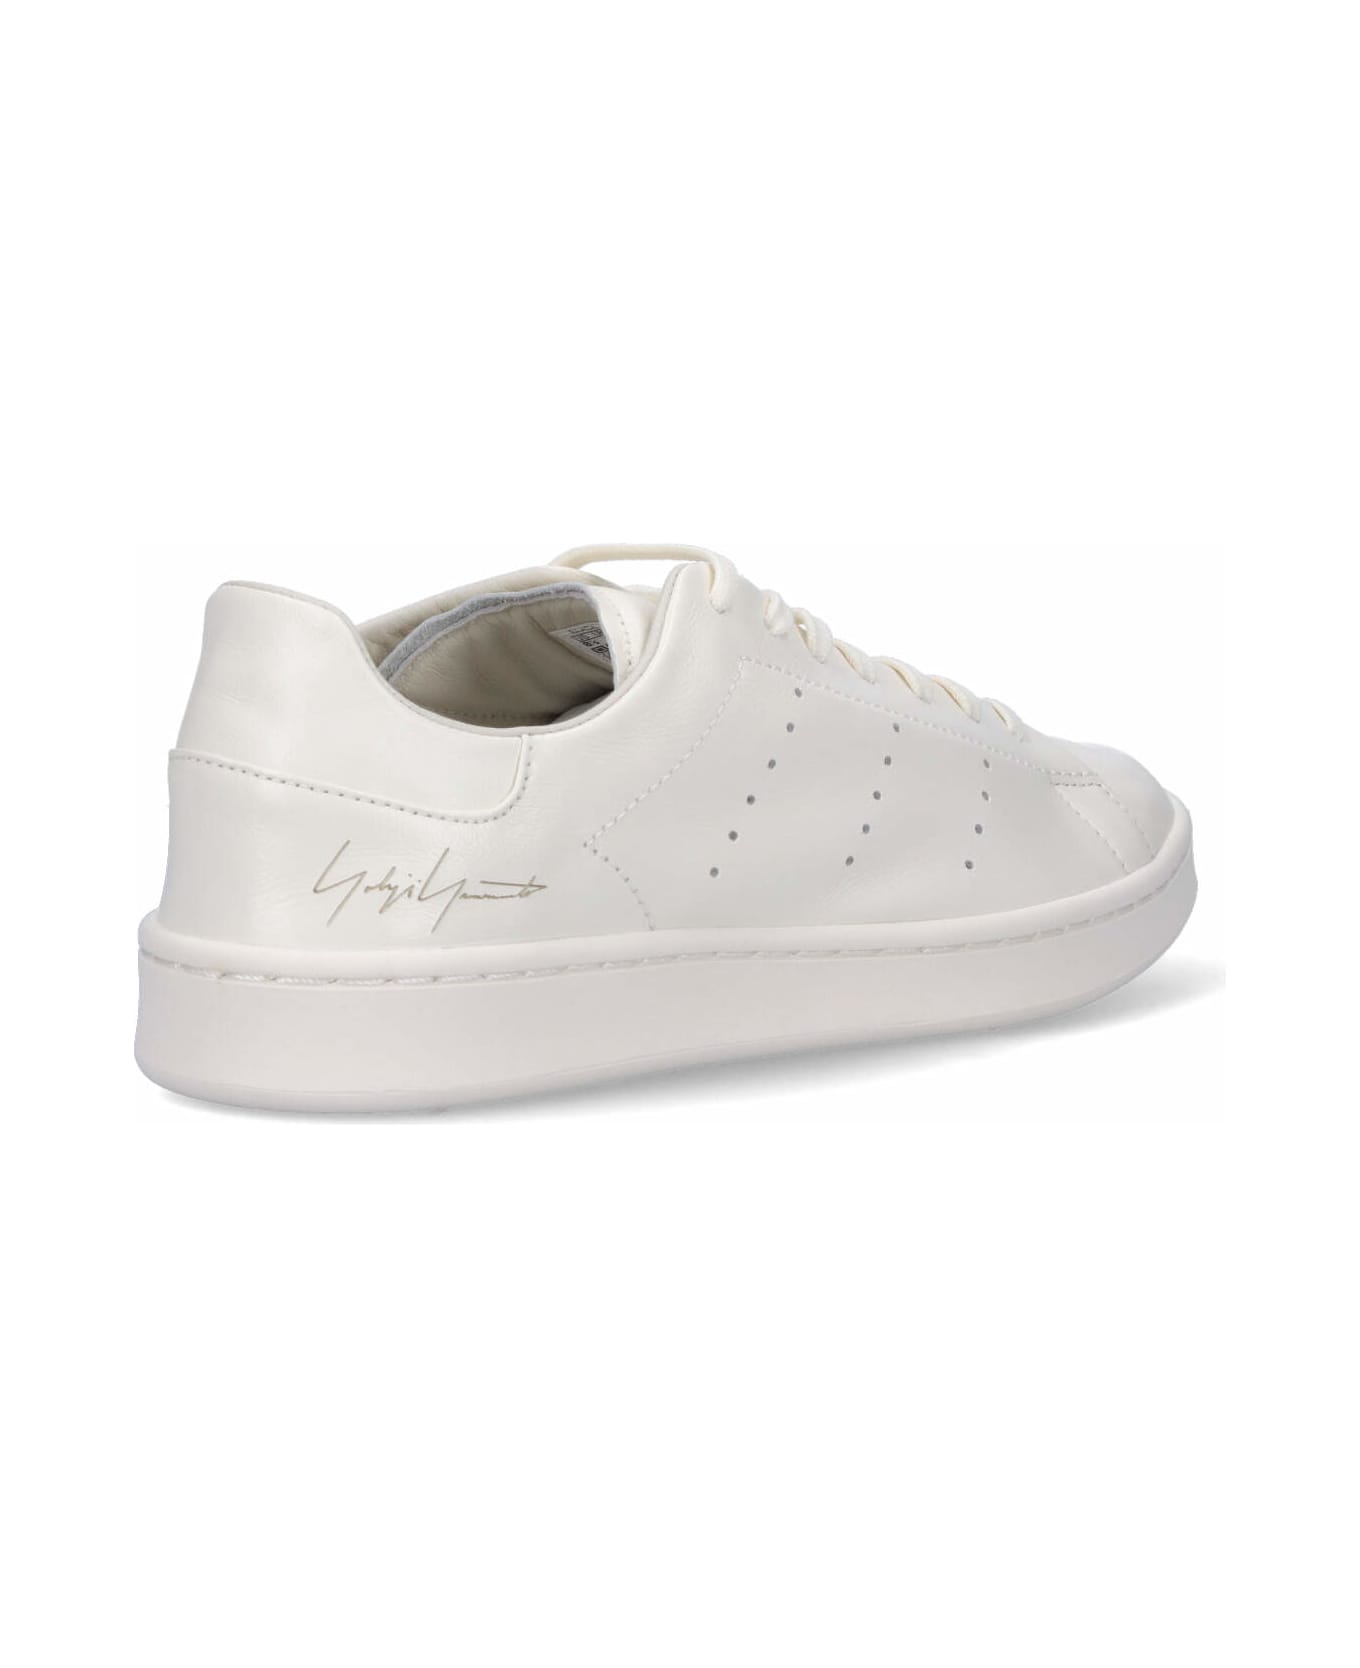 Y-3 "stan Smith" Sneakers - White